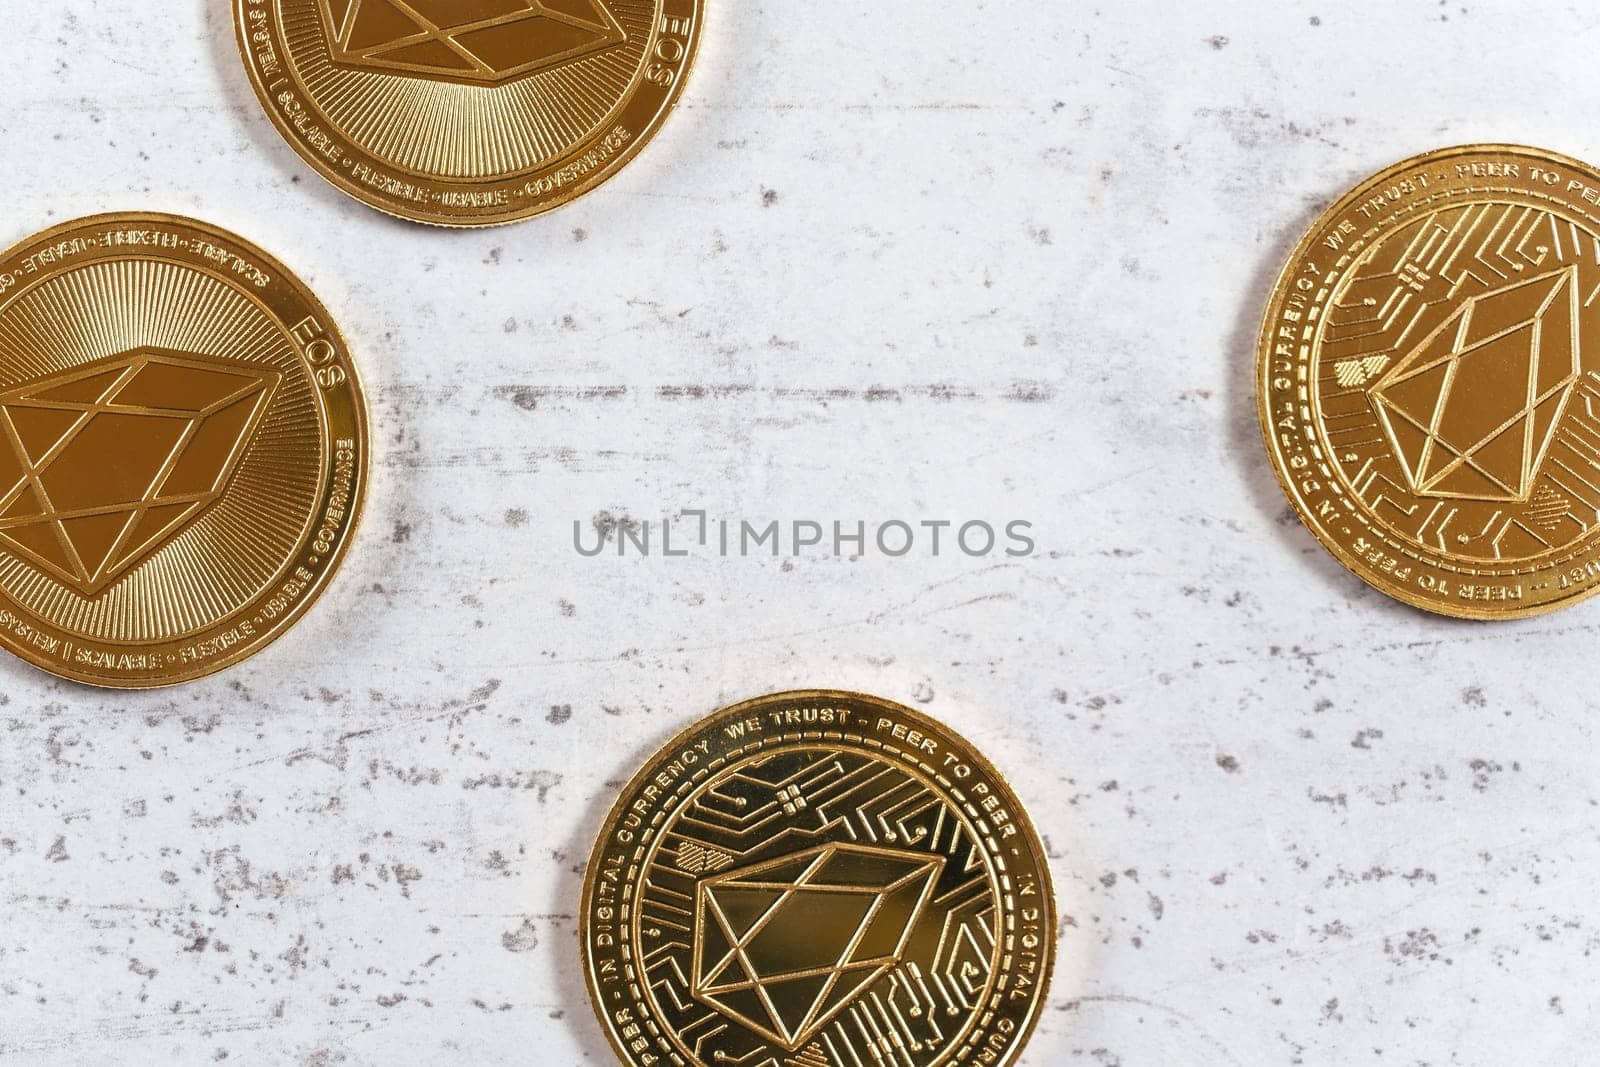 Golden commemorative EOS - EOSIO  cryptocurrency - coins on white stone board, flat lay view